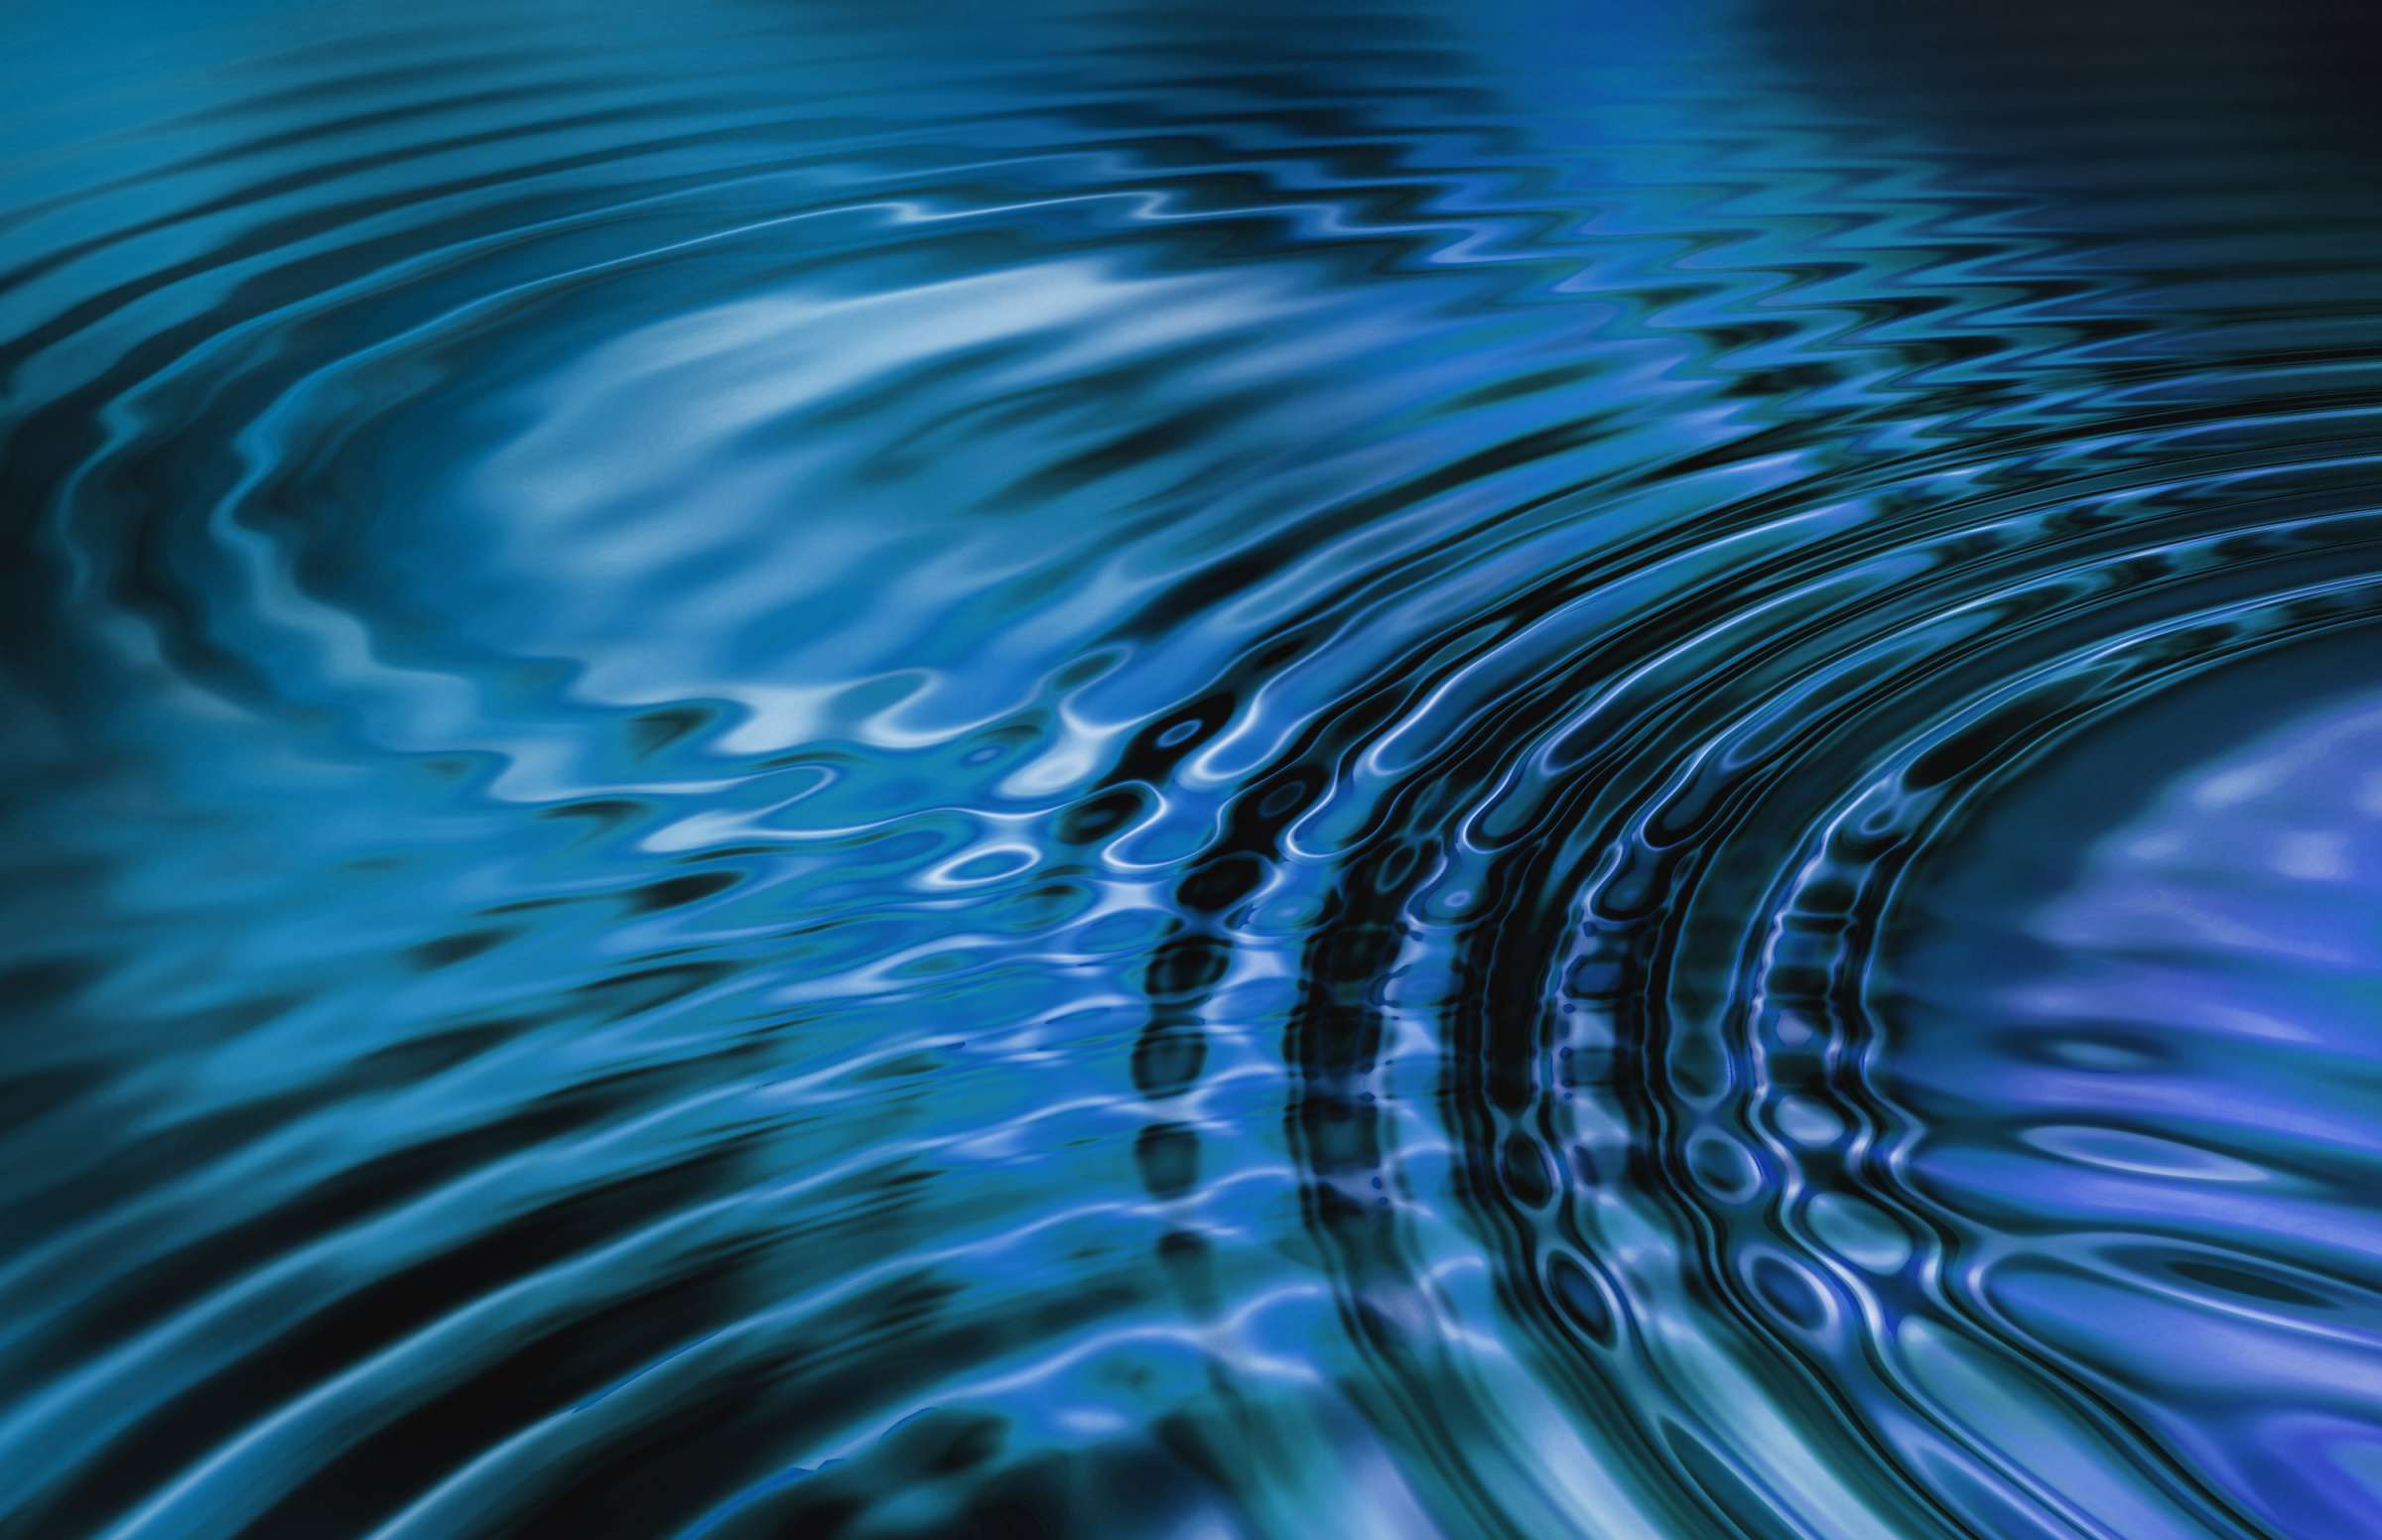 Background image: Foresight Ripples